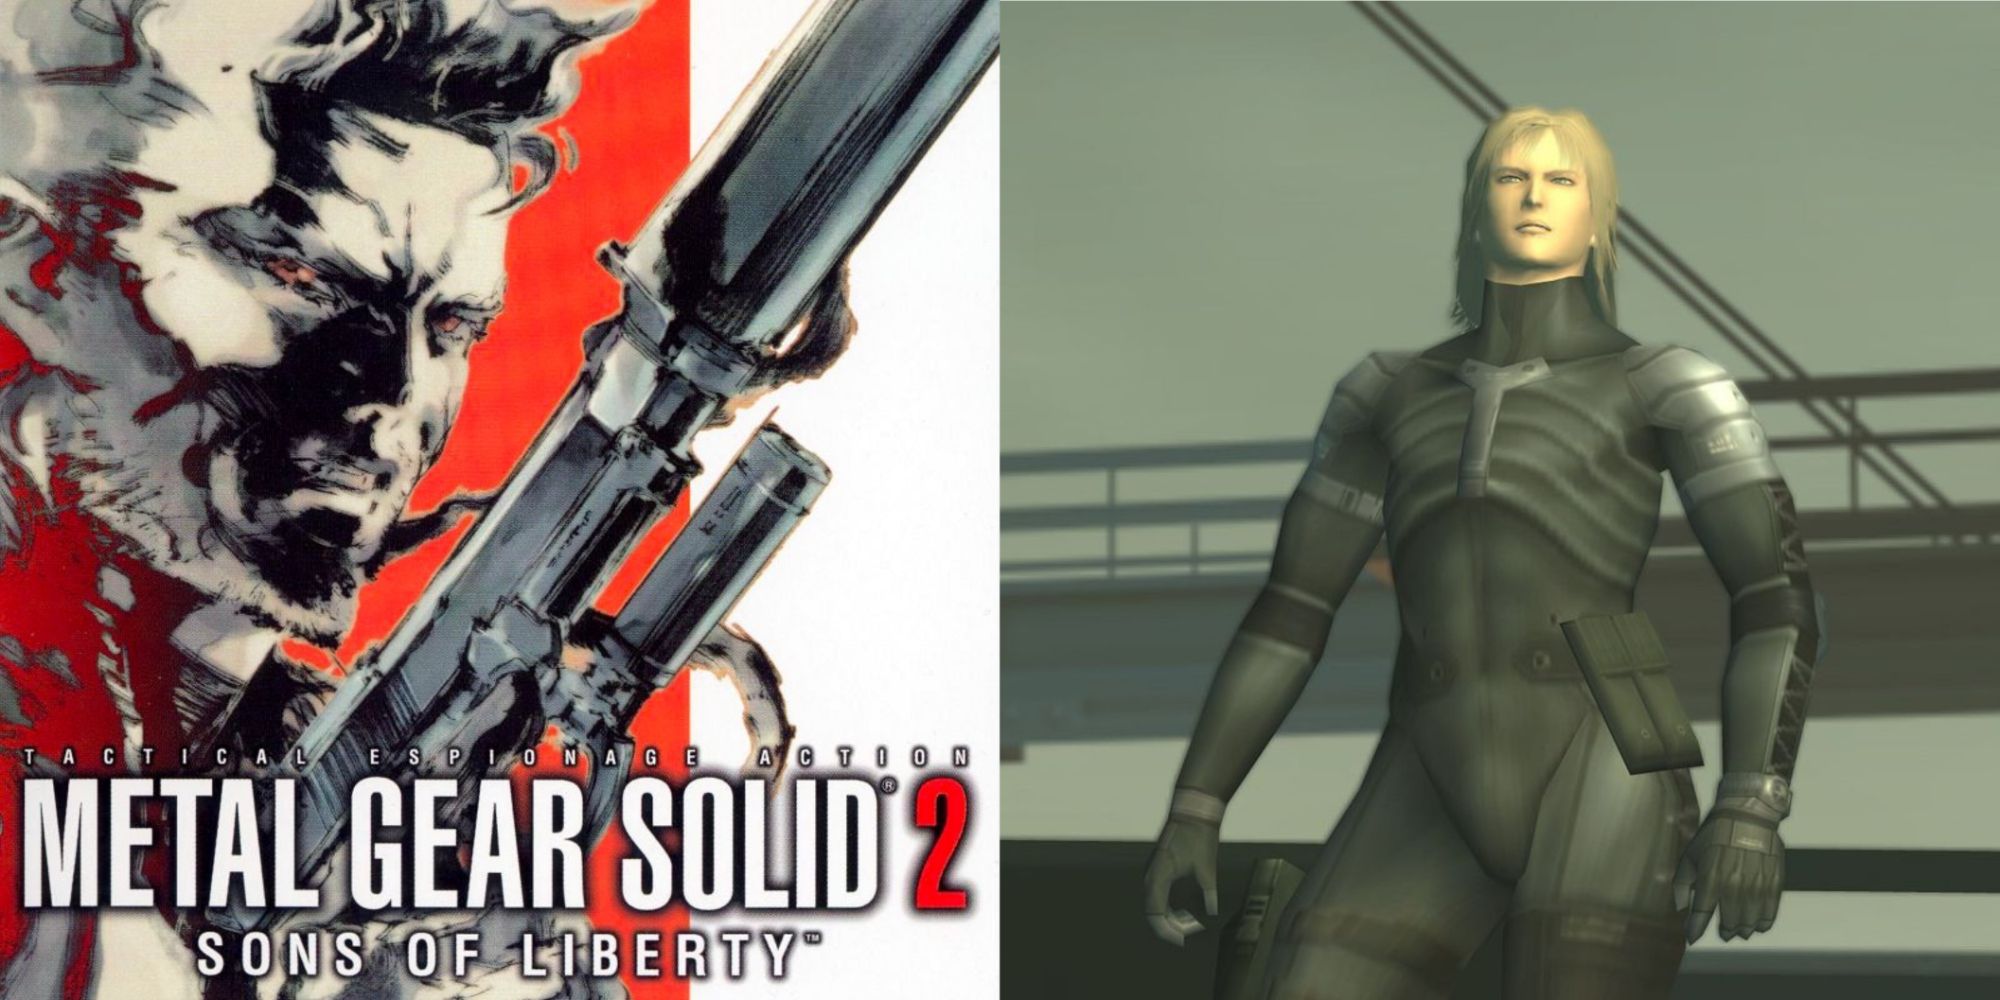 Metal Gear Solid 2 Cover Art and a screenshot of Raiden in the game.